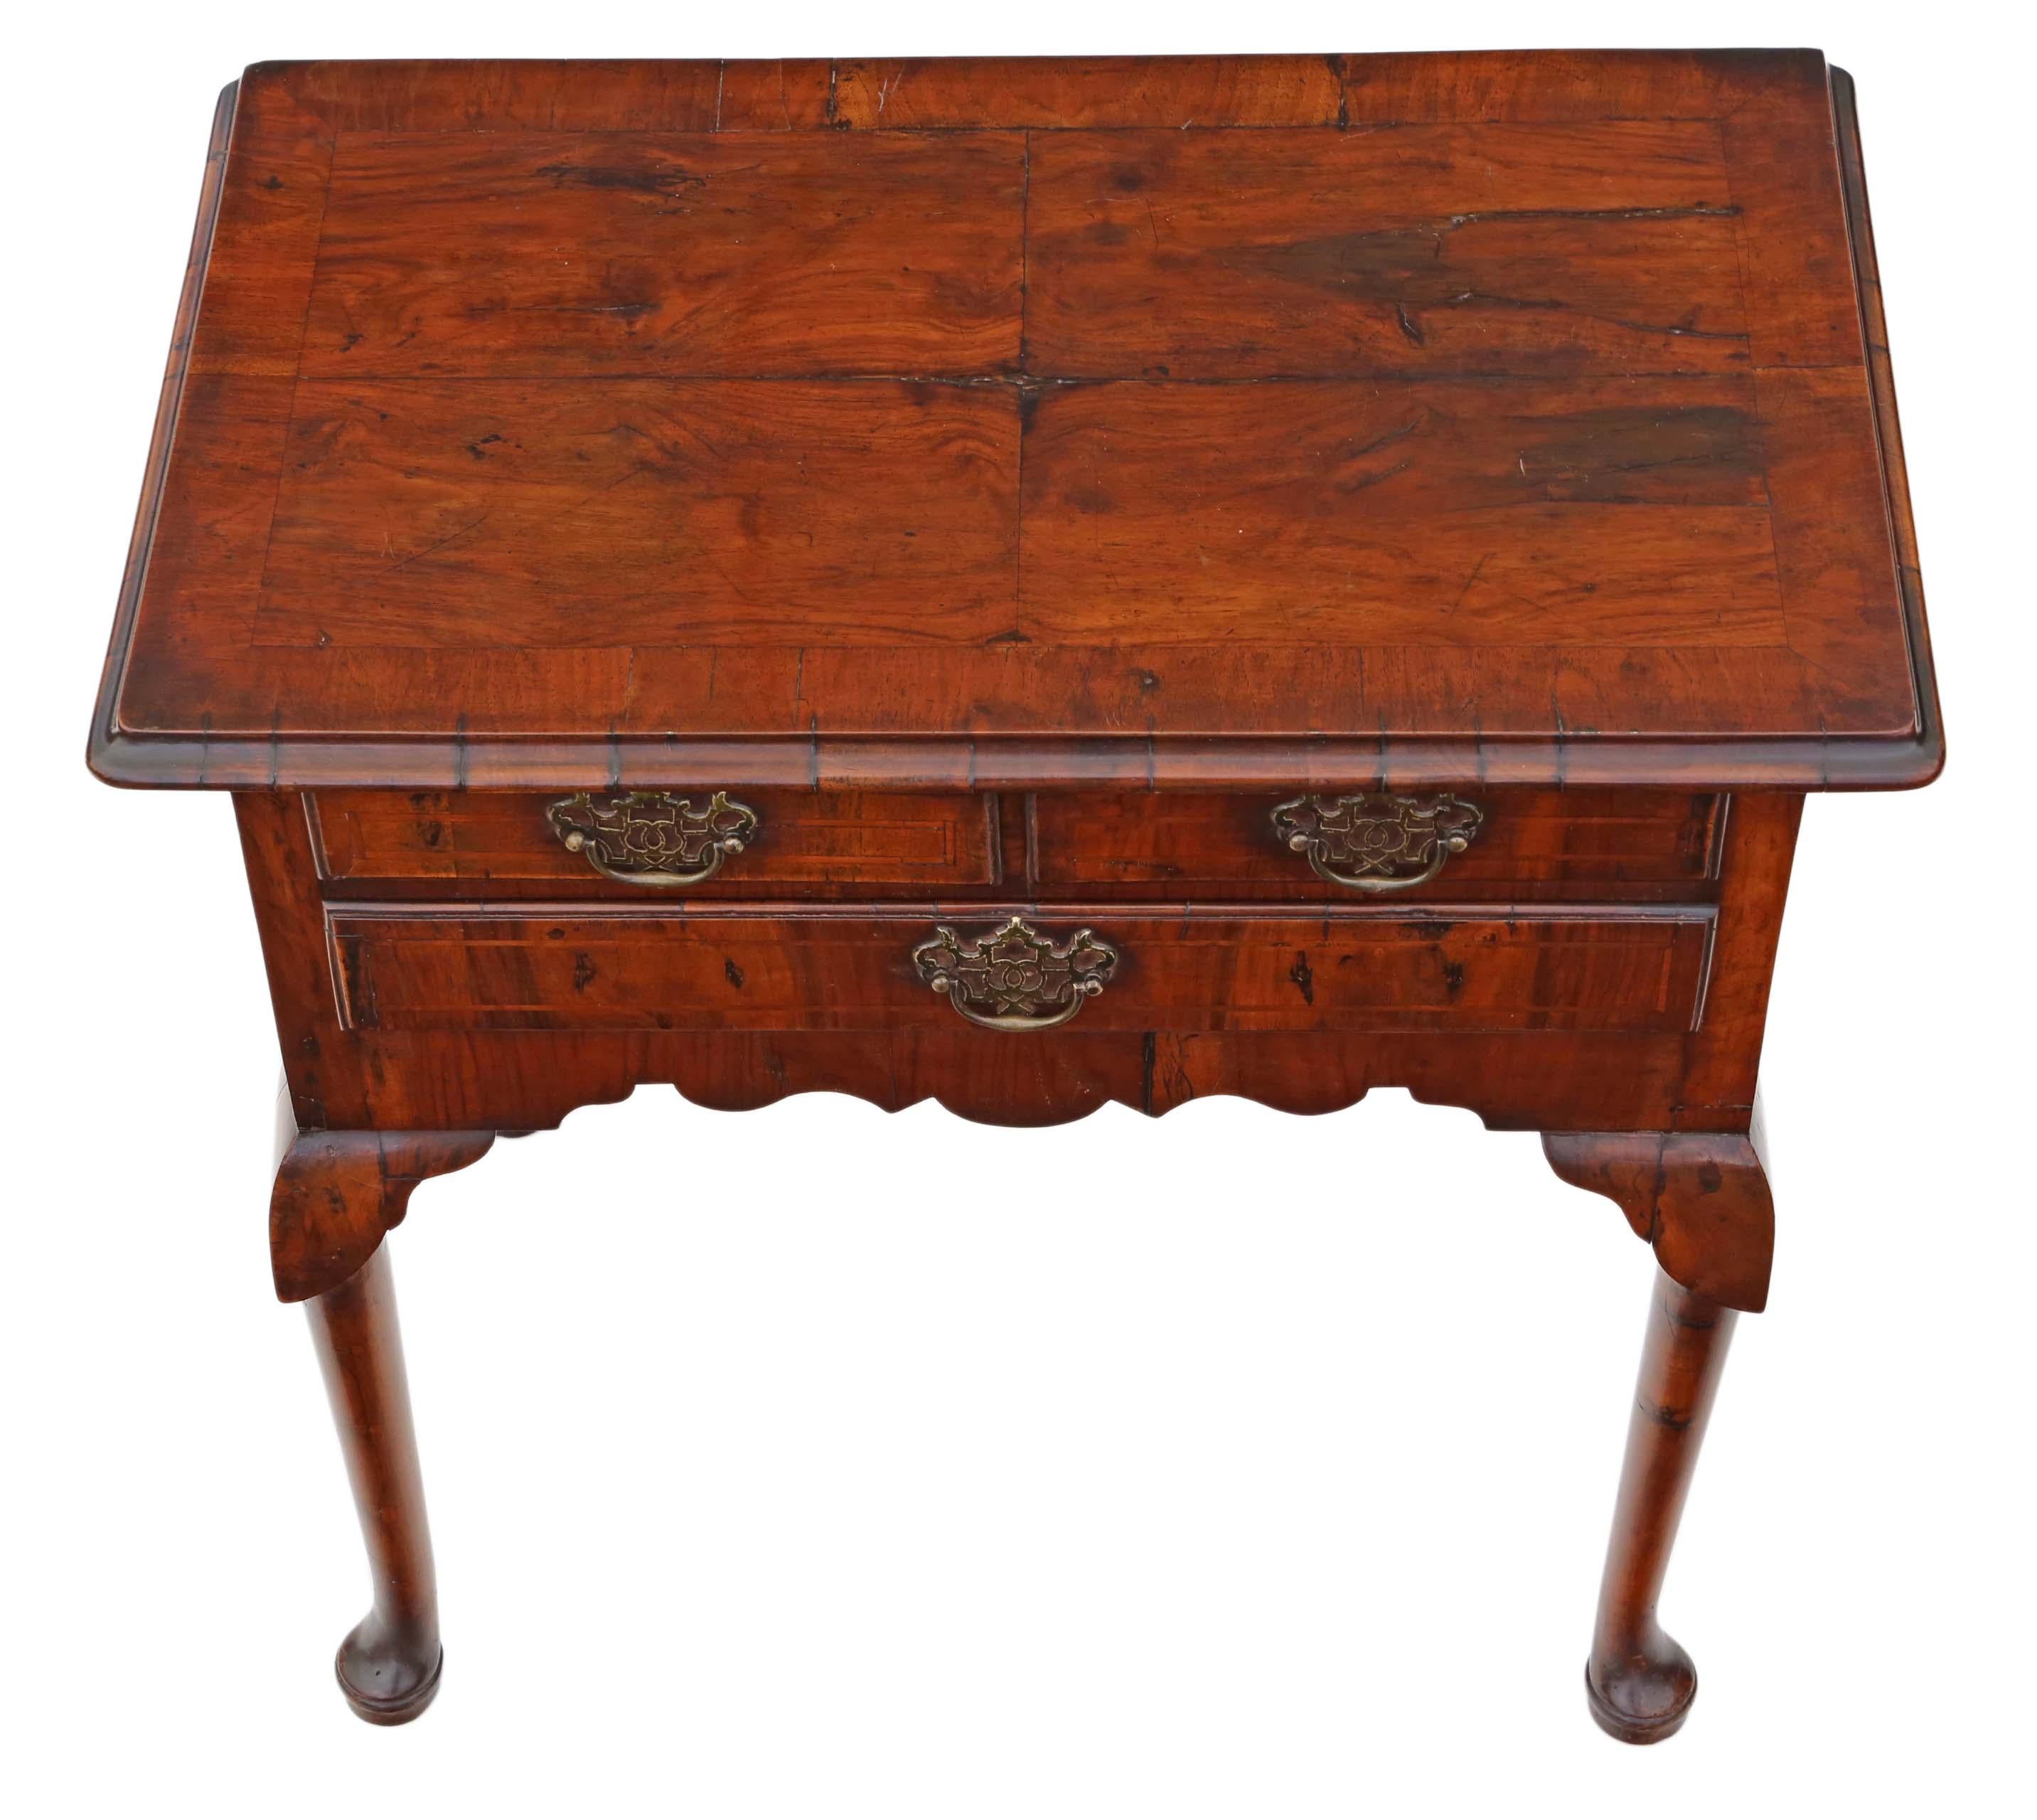 Georgian walnut lowboy writing side table. 18th century origins, but with later alteration.
No loose joints. Full of age, character and charm. The oak lined drawers slide freely.
Would look great in the right location! A charming, characterful